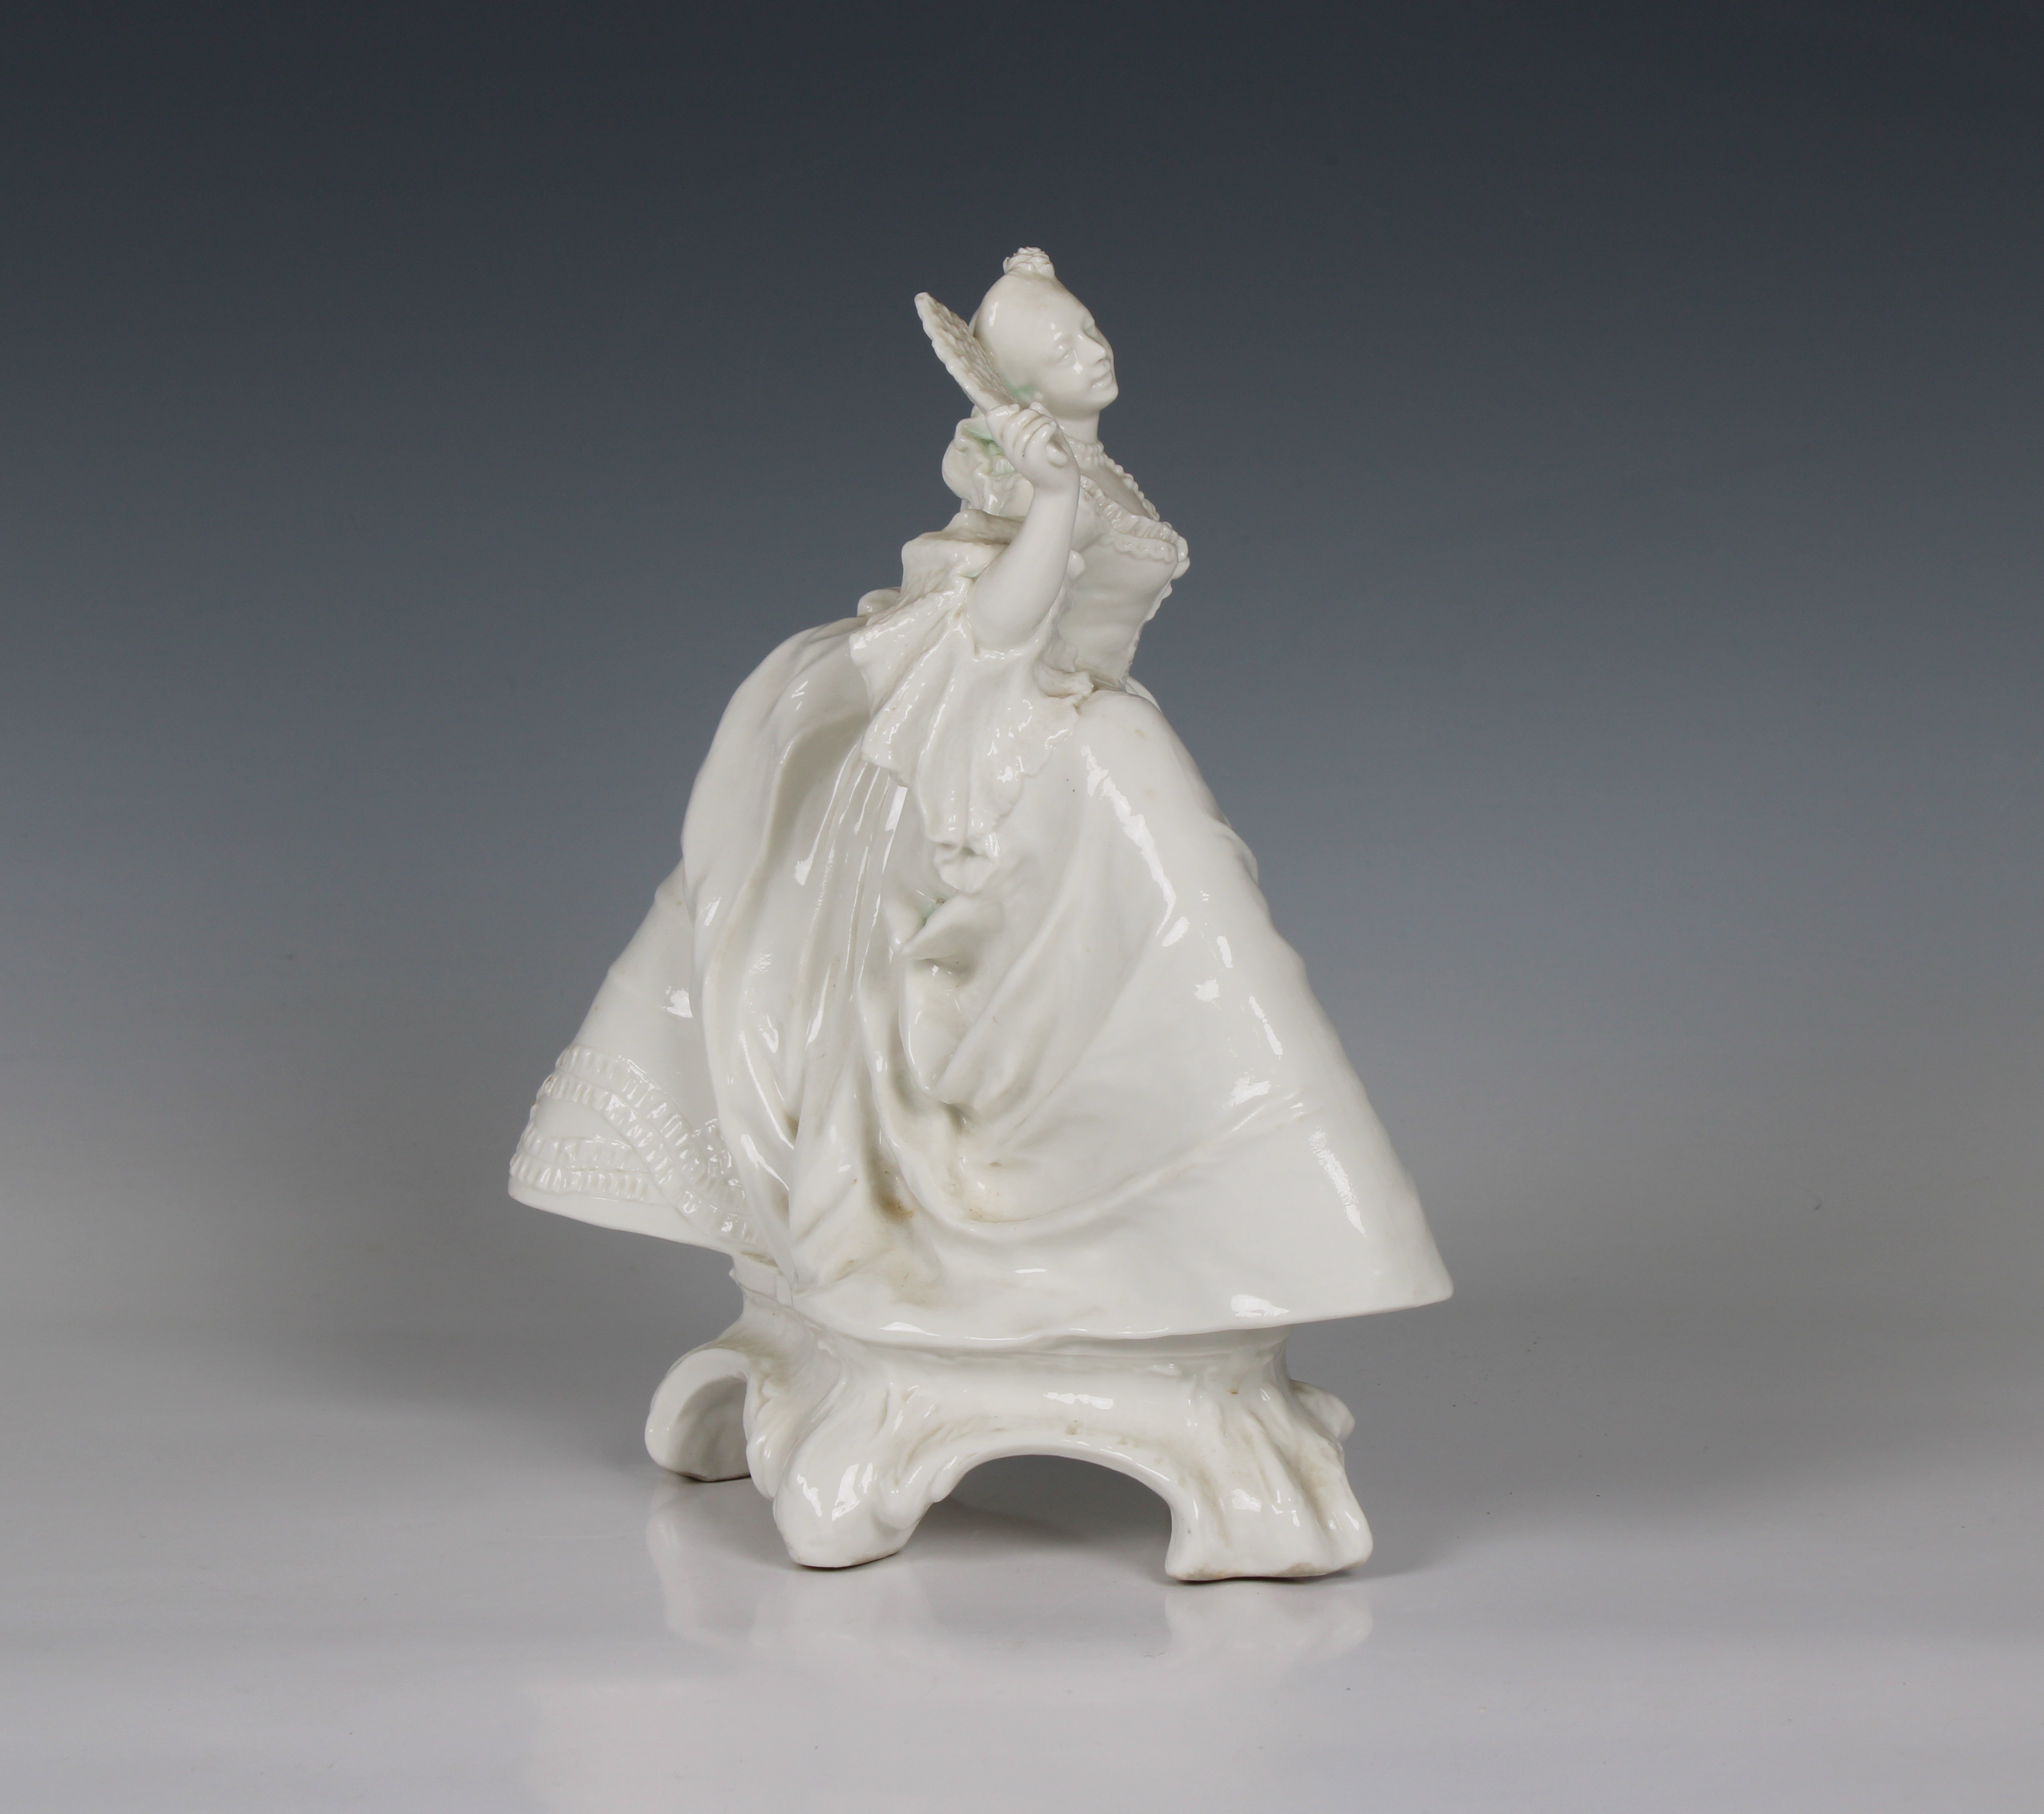 A Nymphenburg white porcelain figure of a lady with a fan - Image 2 of 4